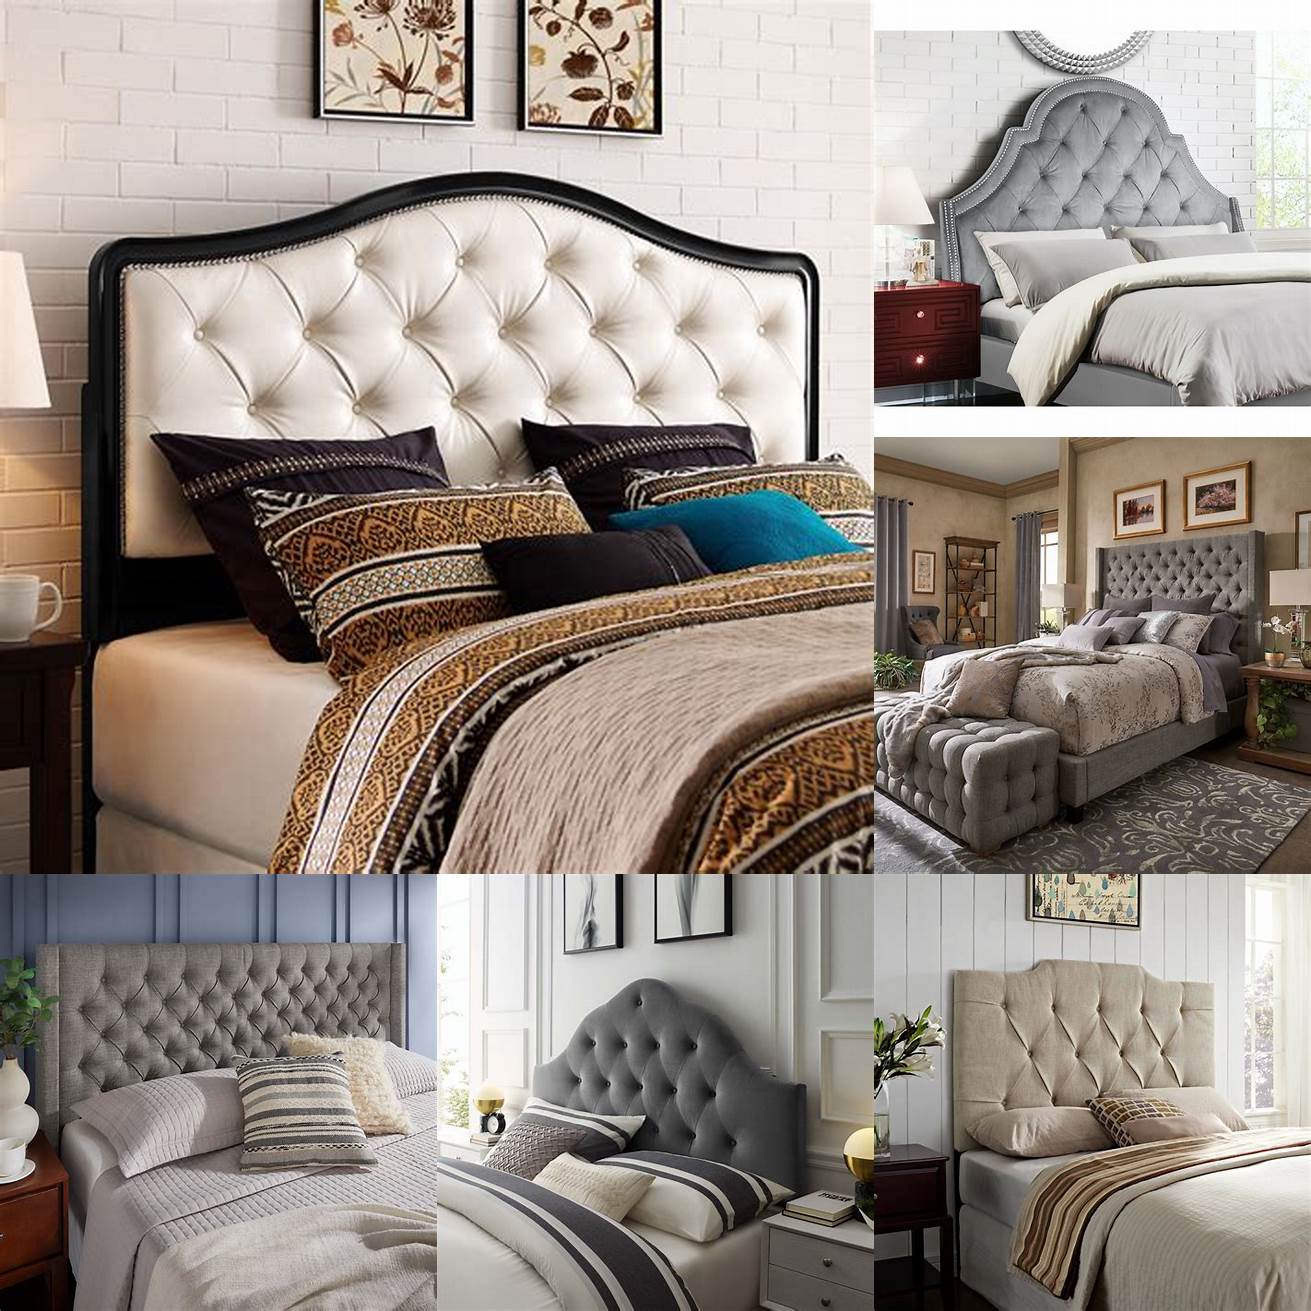 Image of a king size bed with a tufted headboard